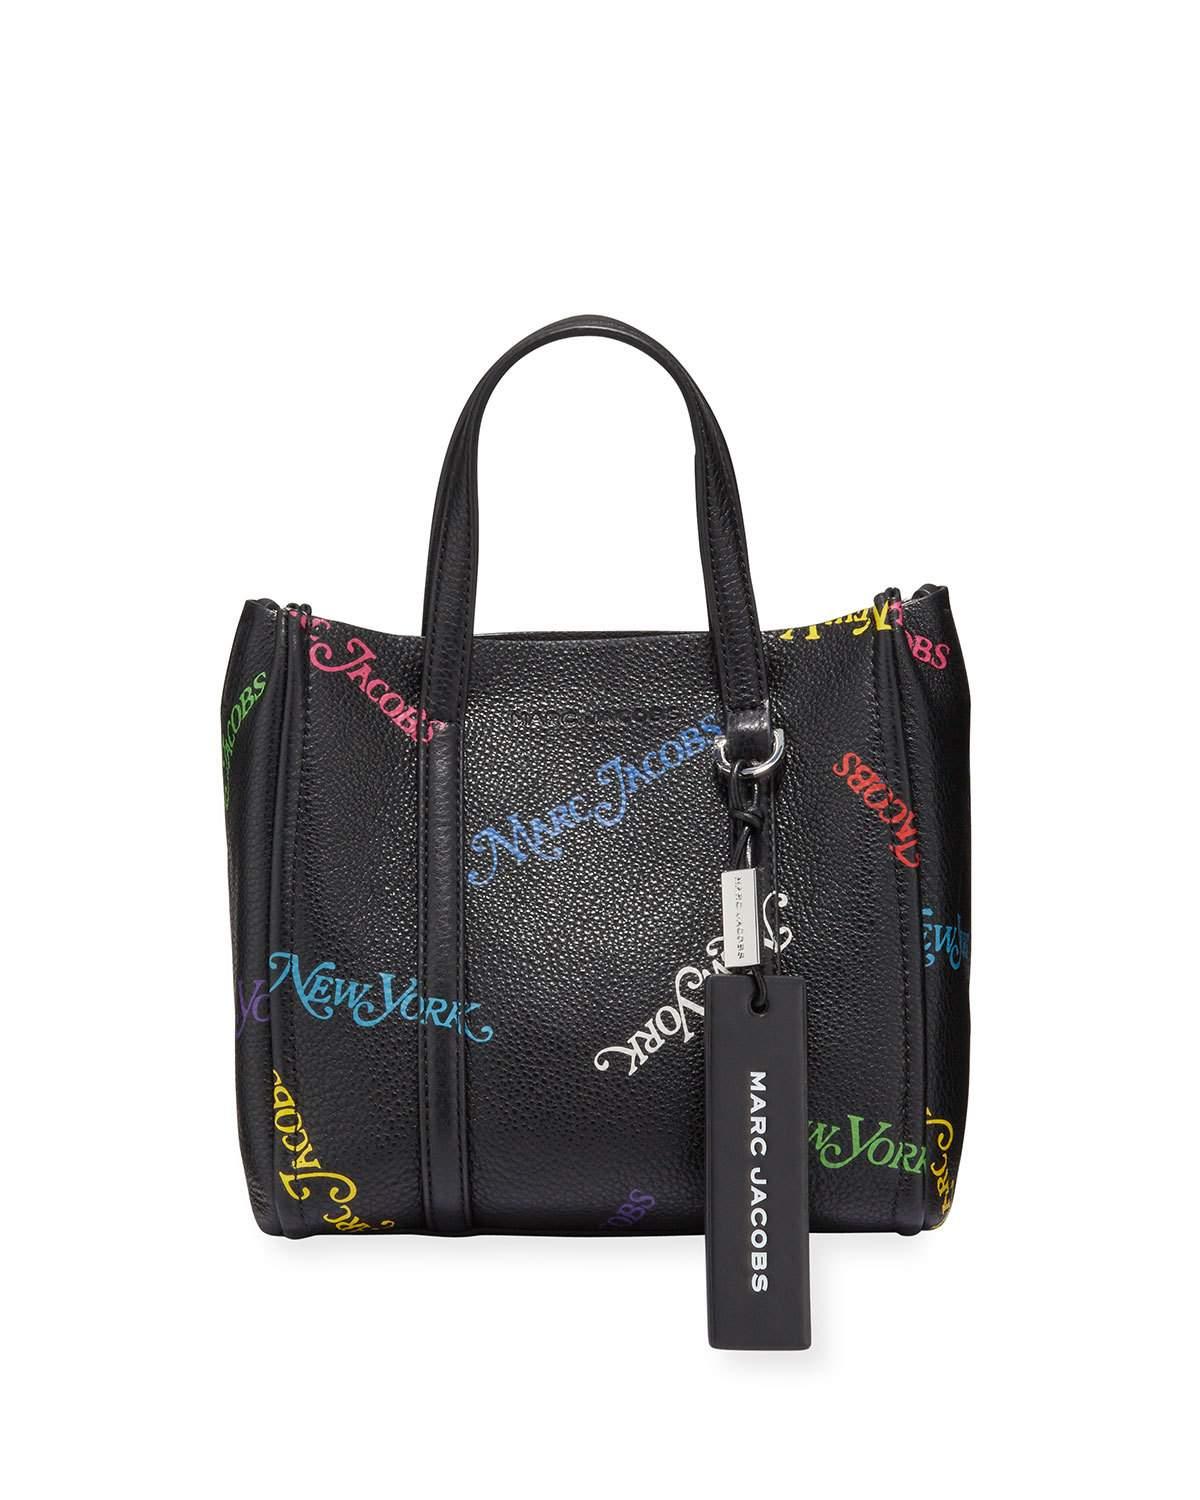 Marc Jacobs X New York Magazine The Tag Leather Tote Bag in Black - Lyst